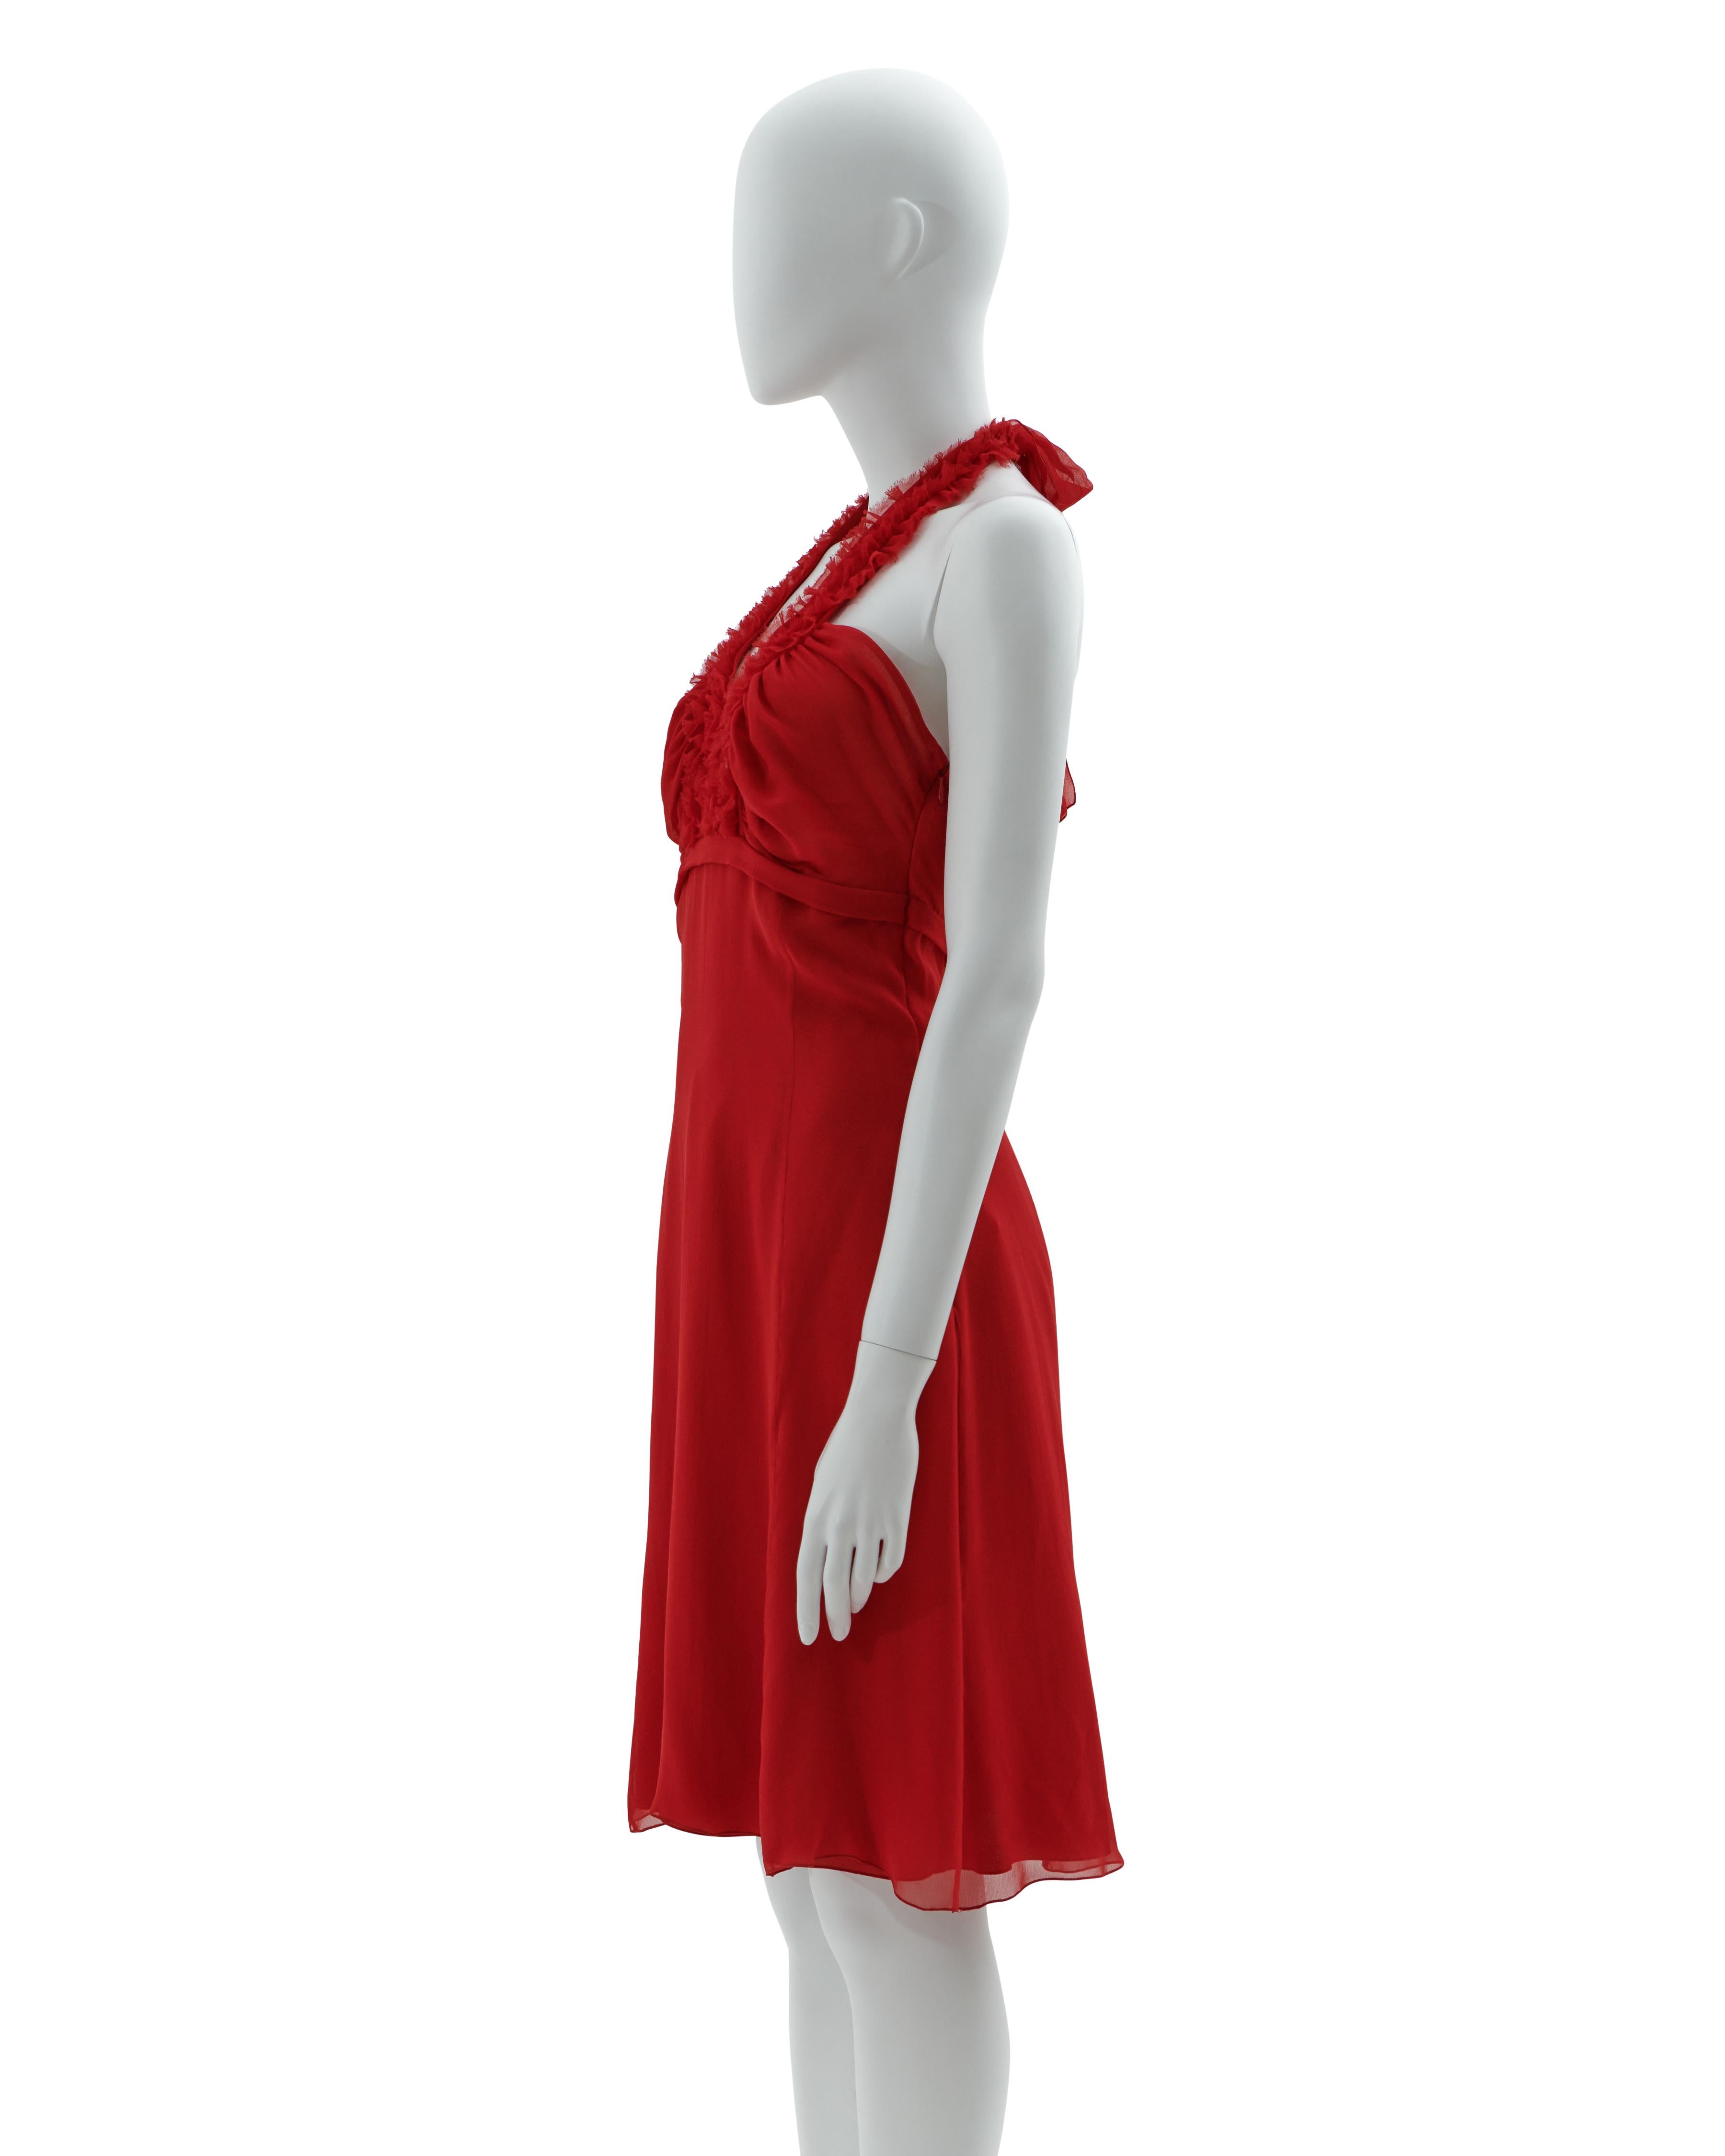 - Red halter neck chiffon cocktail dress
- Sold by Skof.Archive
- Frontal ruffled detail 
- Adjustable American neckline 
- Hidden side zipper closure 
- Spring-Summer 2007
- Made in Italy

Condition: Excellent. Wear consistent with age and use.